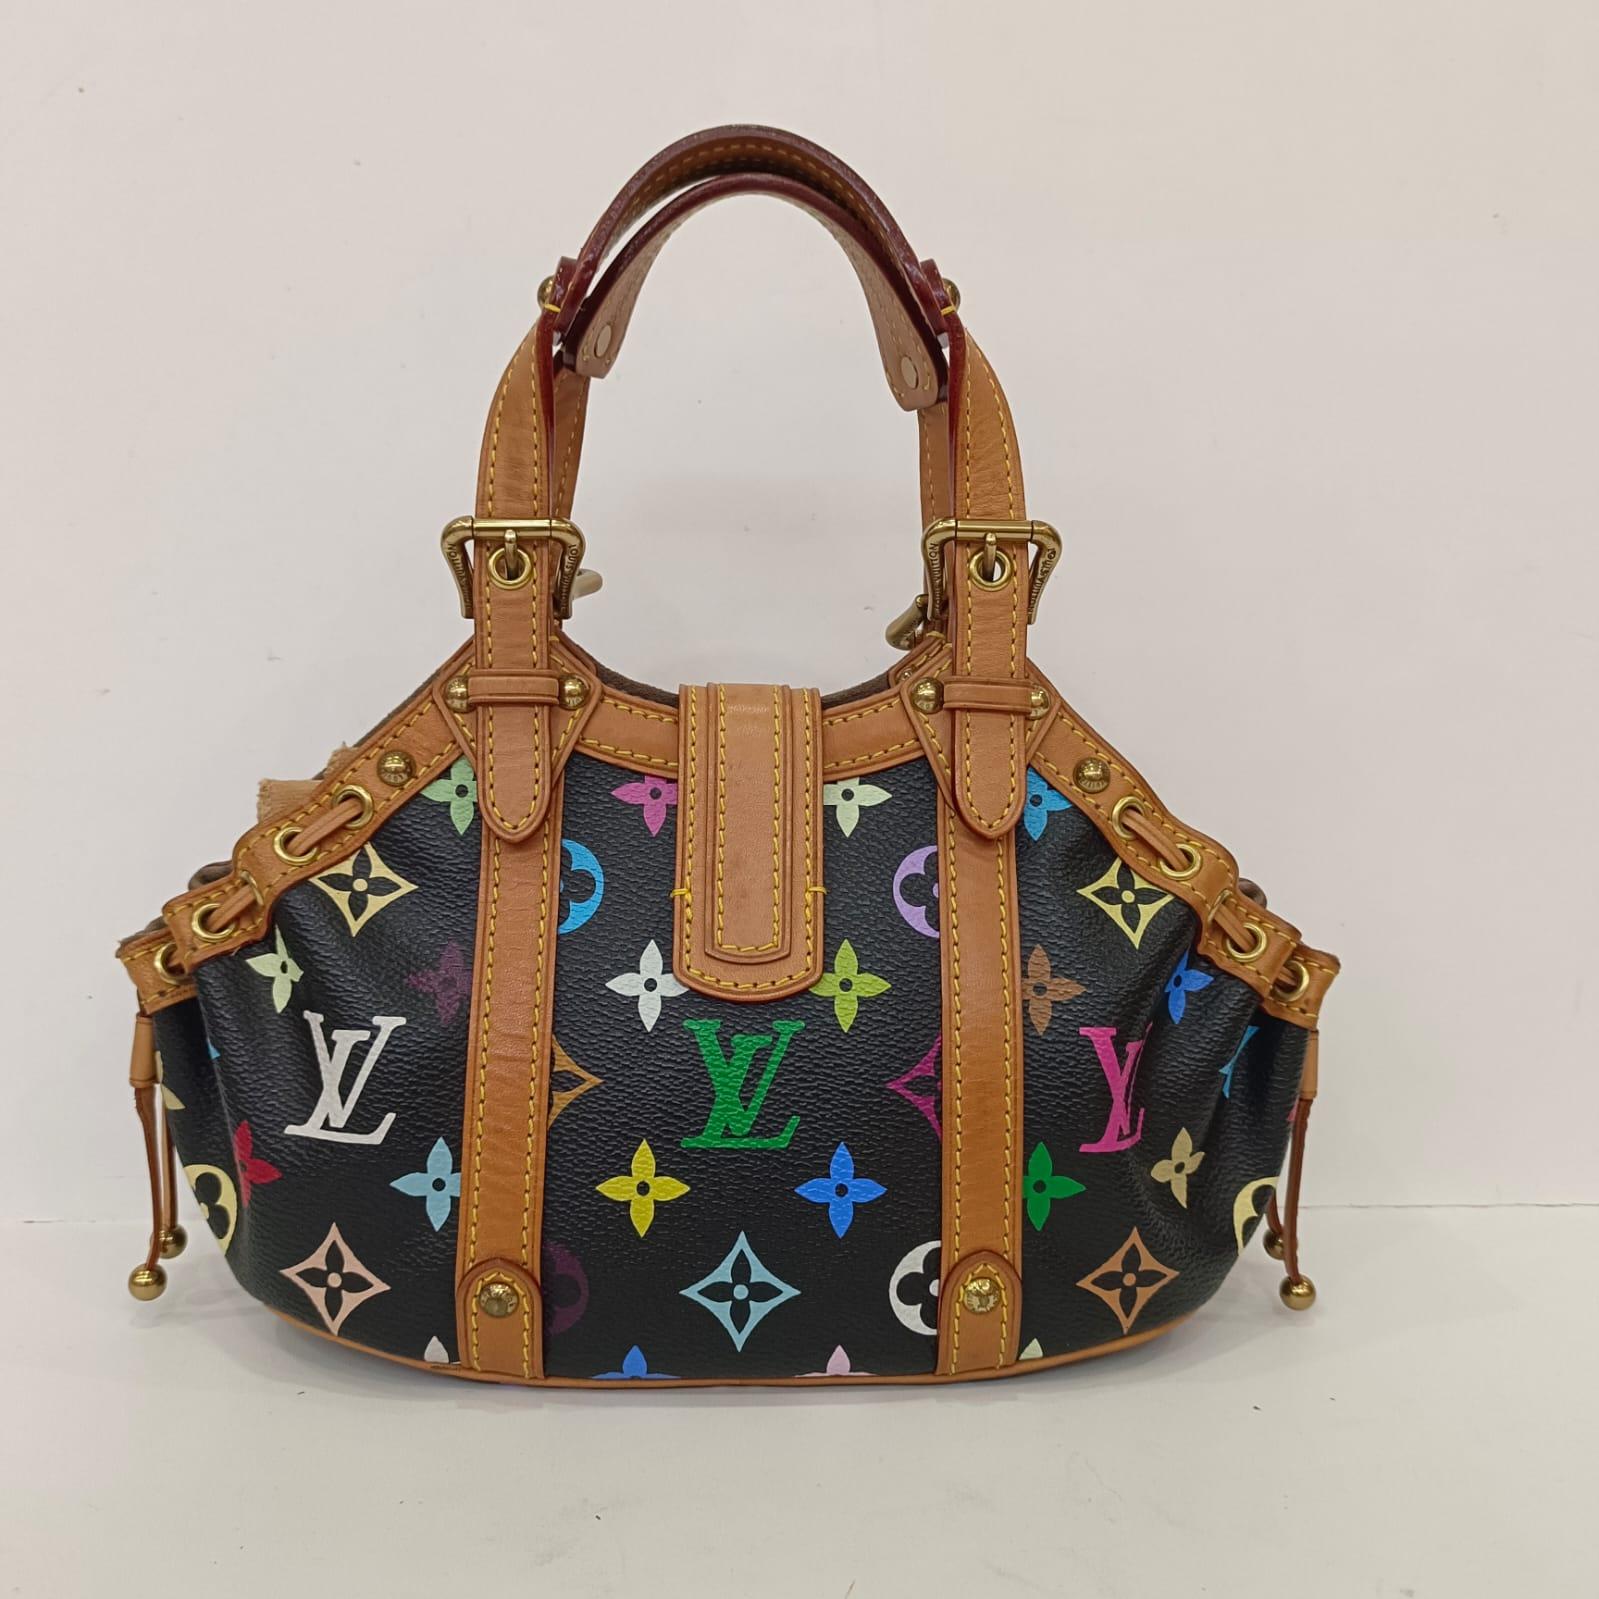 Louis Vuitton black multicolor theda in rare PM size. Very cute and perfect for multicolor collectors. Wearable for formal events too. Overall in very good condition, very minor water marks on the leather trims, but not significant. Comes with its